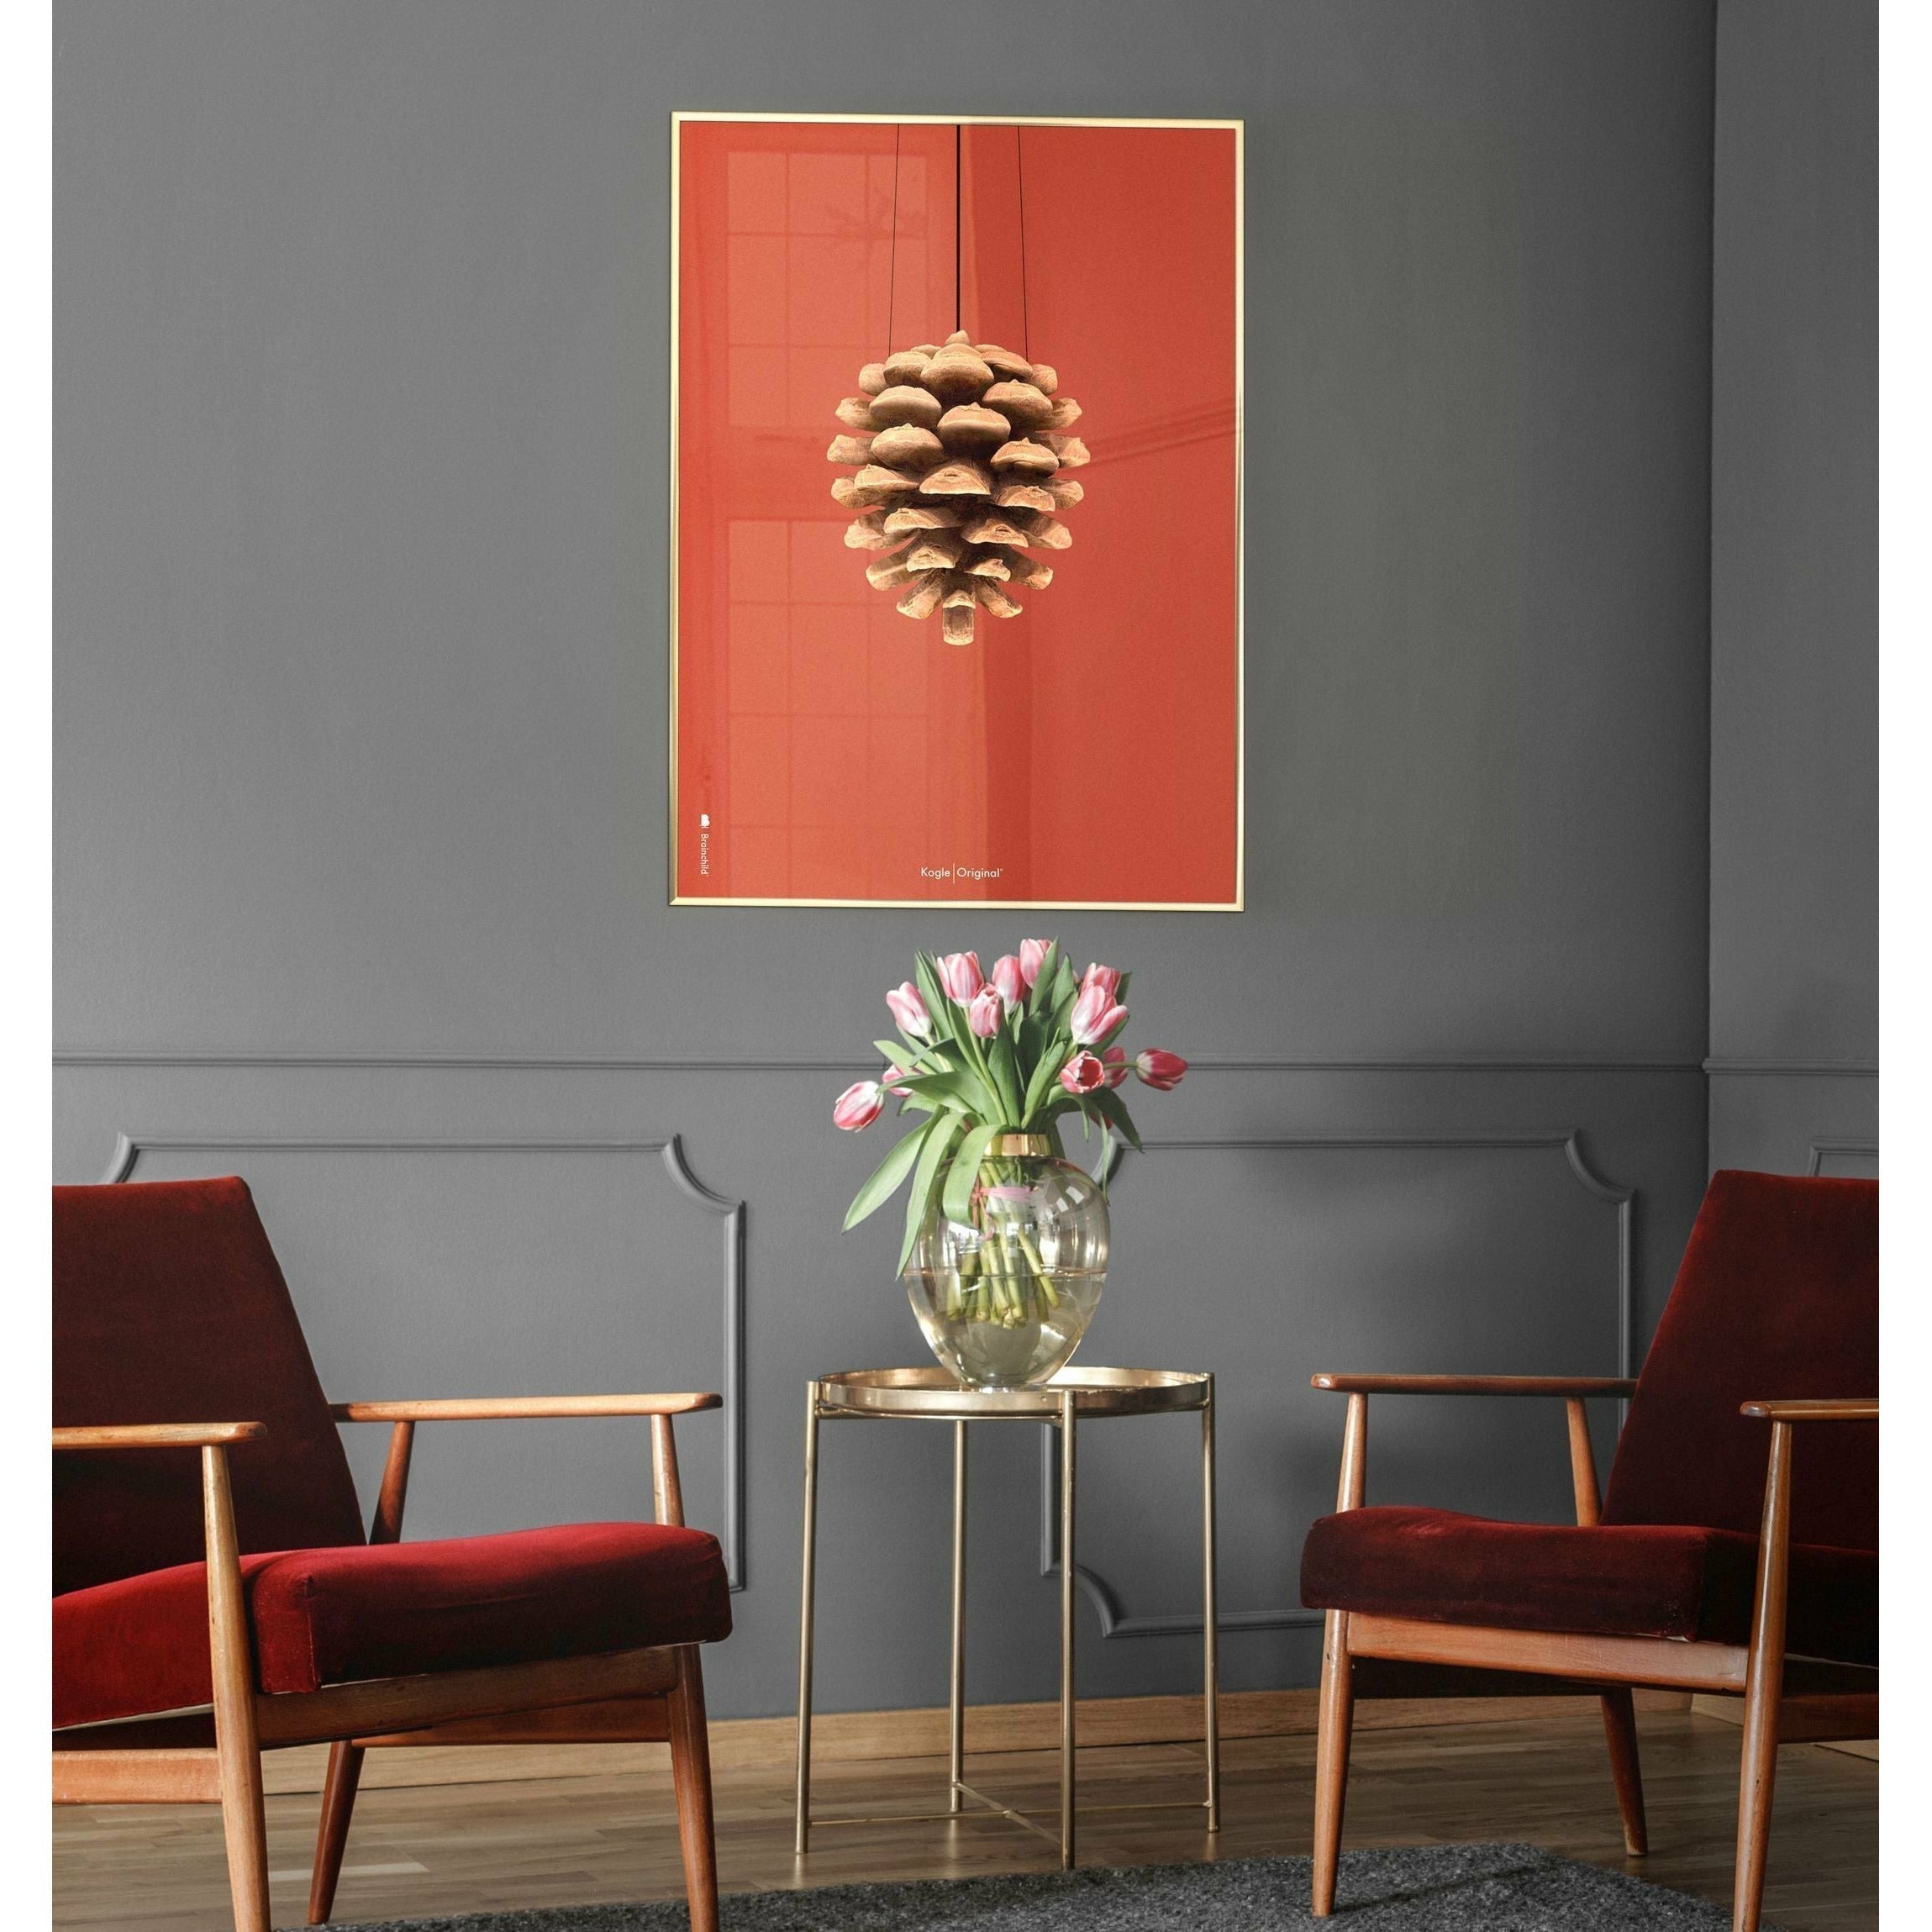 Brainchild Pine Cone Classic Poster, Frame In Black Lacquered Wood 70x100 Cm, Red Background